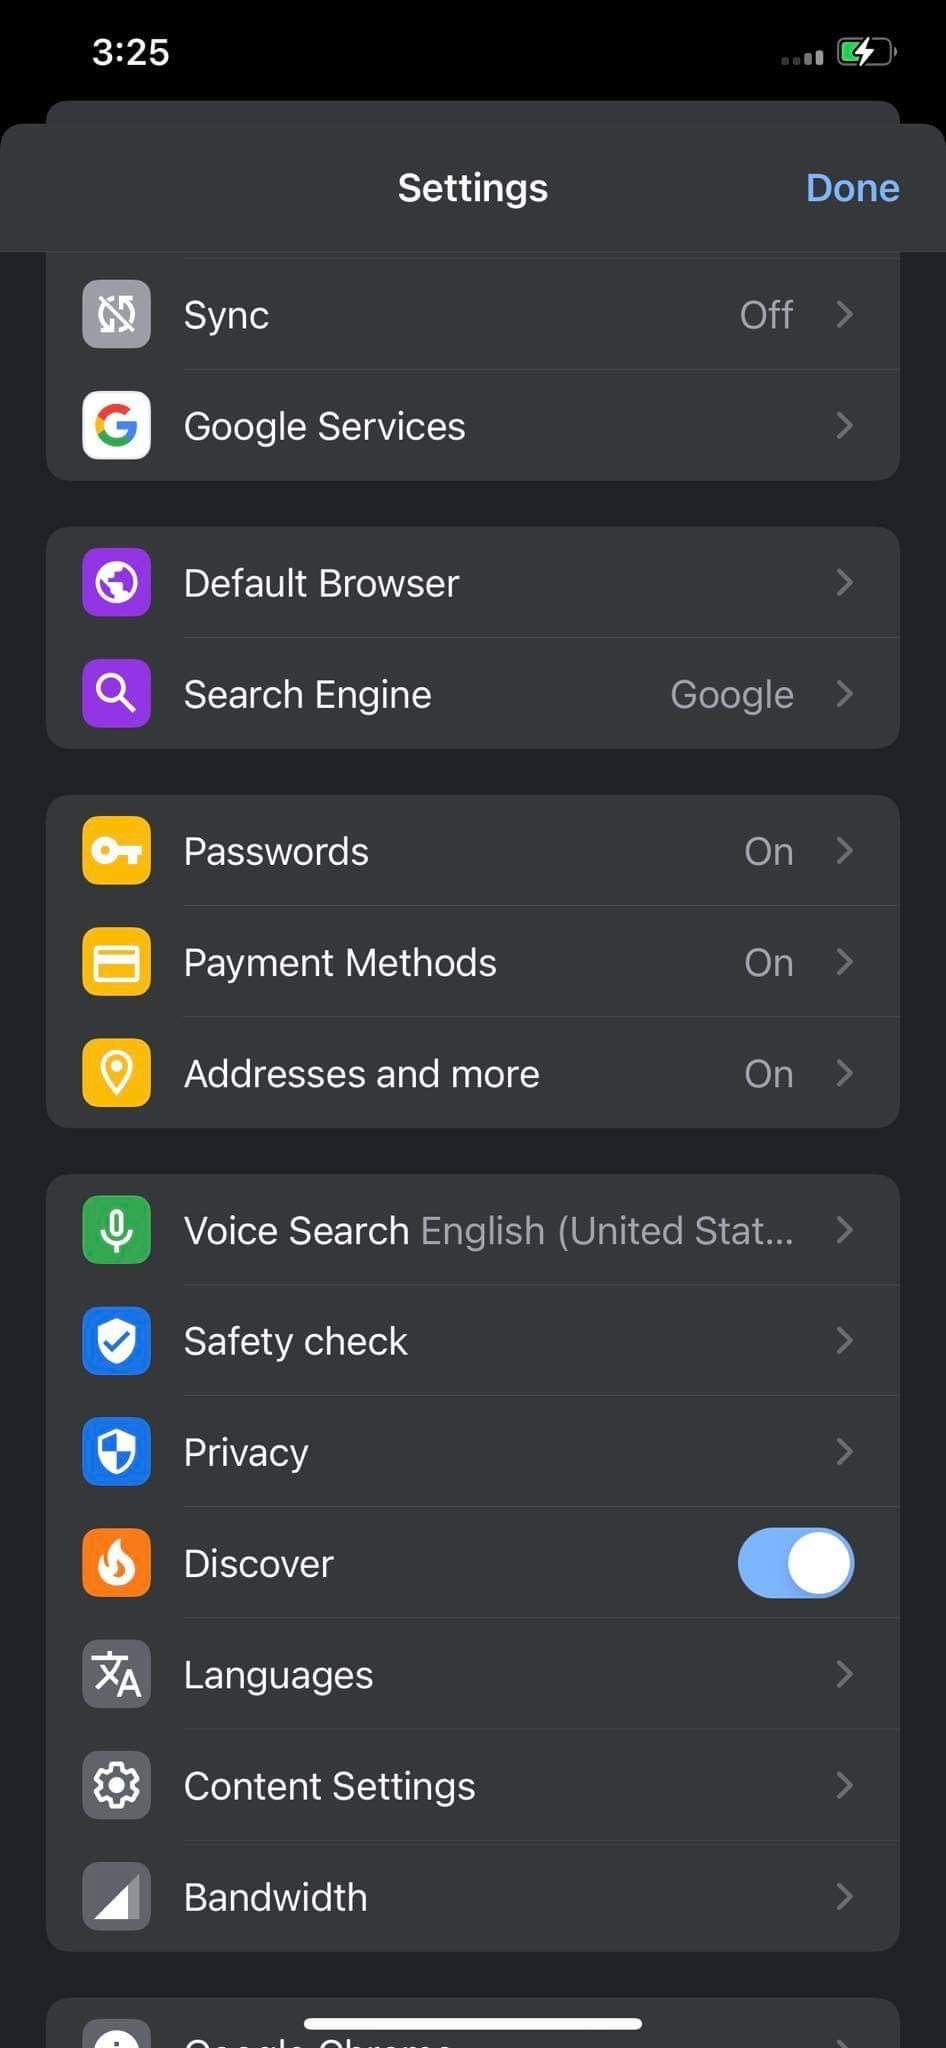 Opening Search Engine Option in Settings Tab on Chrome for iOS